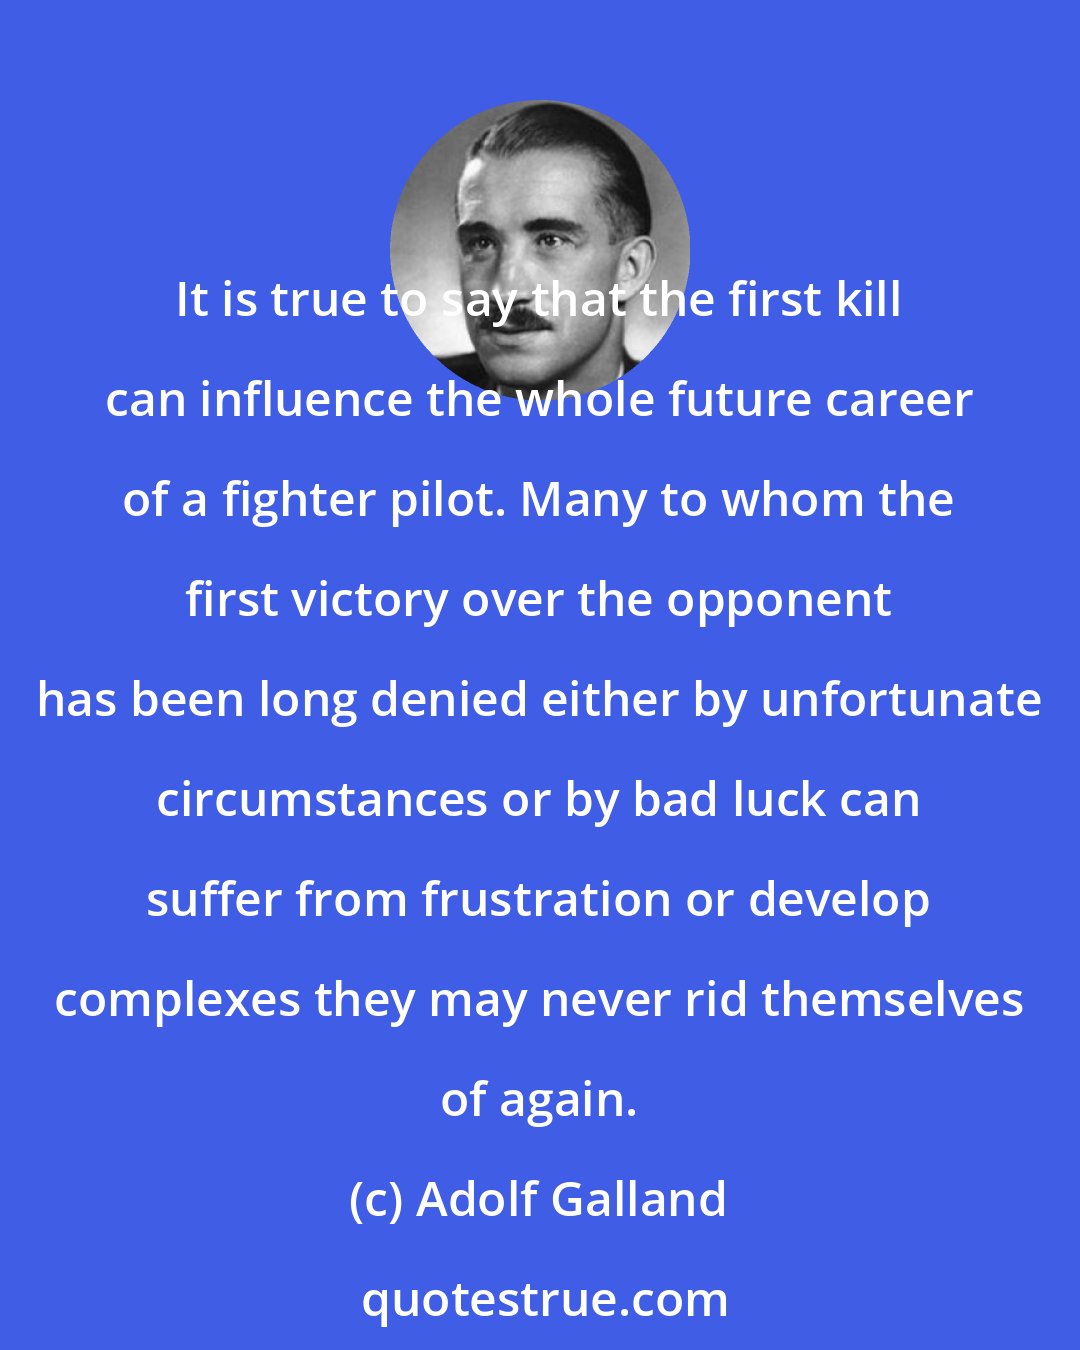 Adolf Galland: It is true to say that the first kill can influence the whole future career of a fighter pilot. Many to whom the first victory over the opponent has been long denied either by unfortunate circumstances or by bad luck can suffer from frustration or develop complexes they may never rid themselves of again.